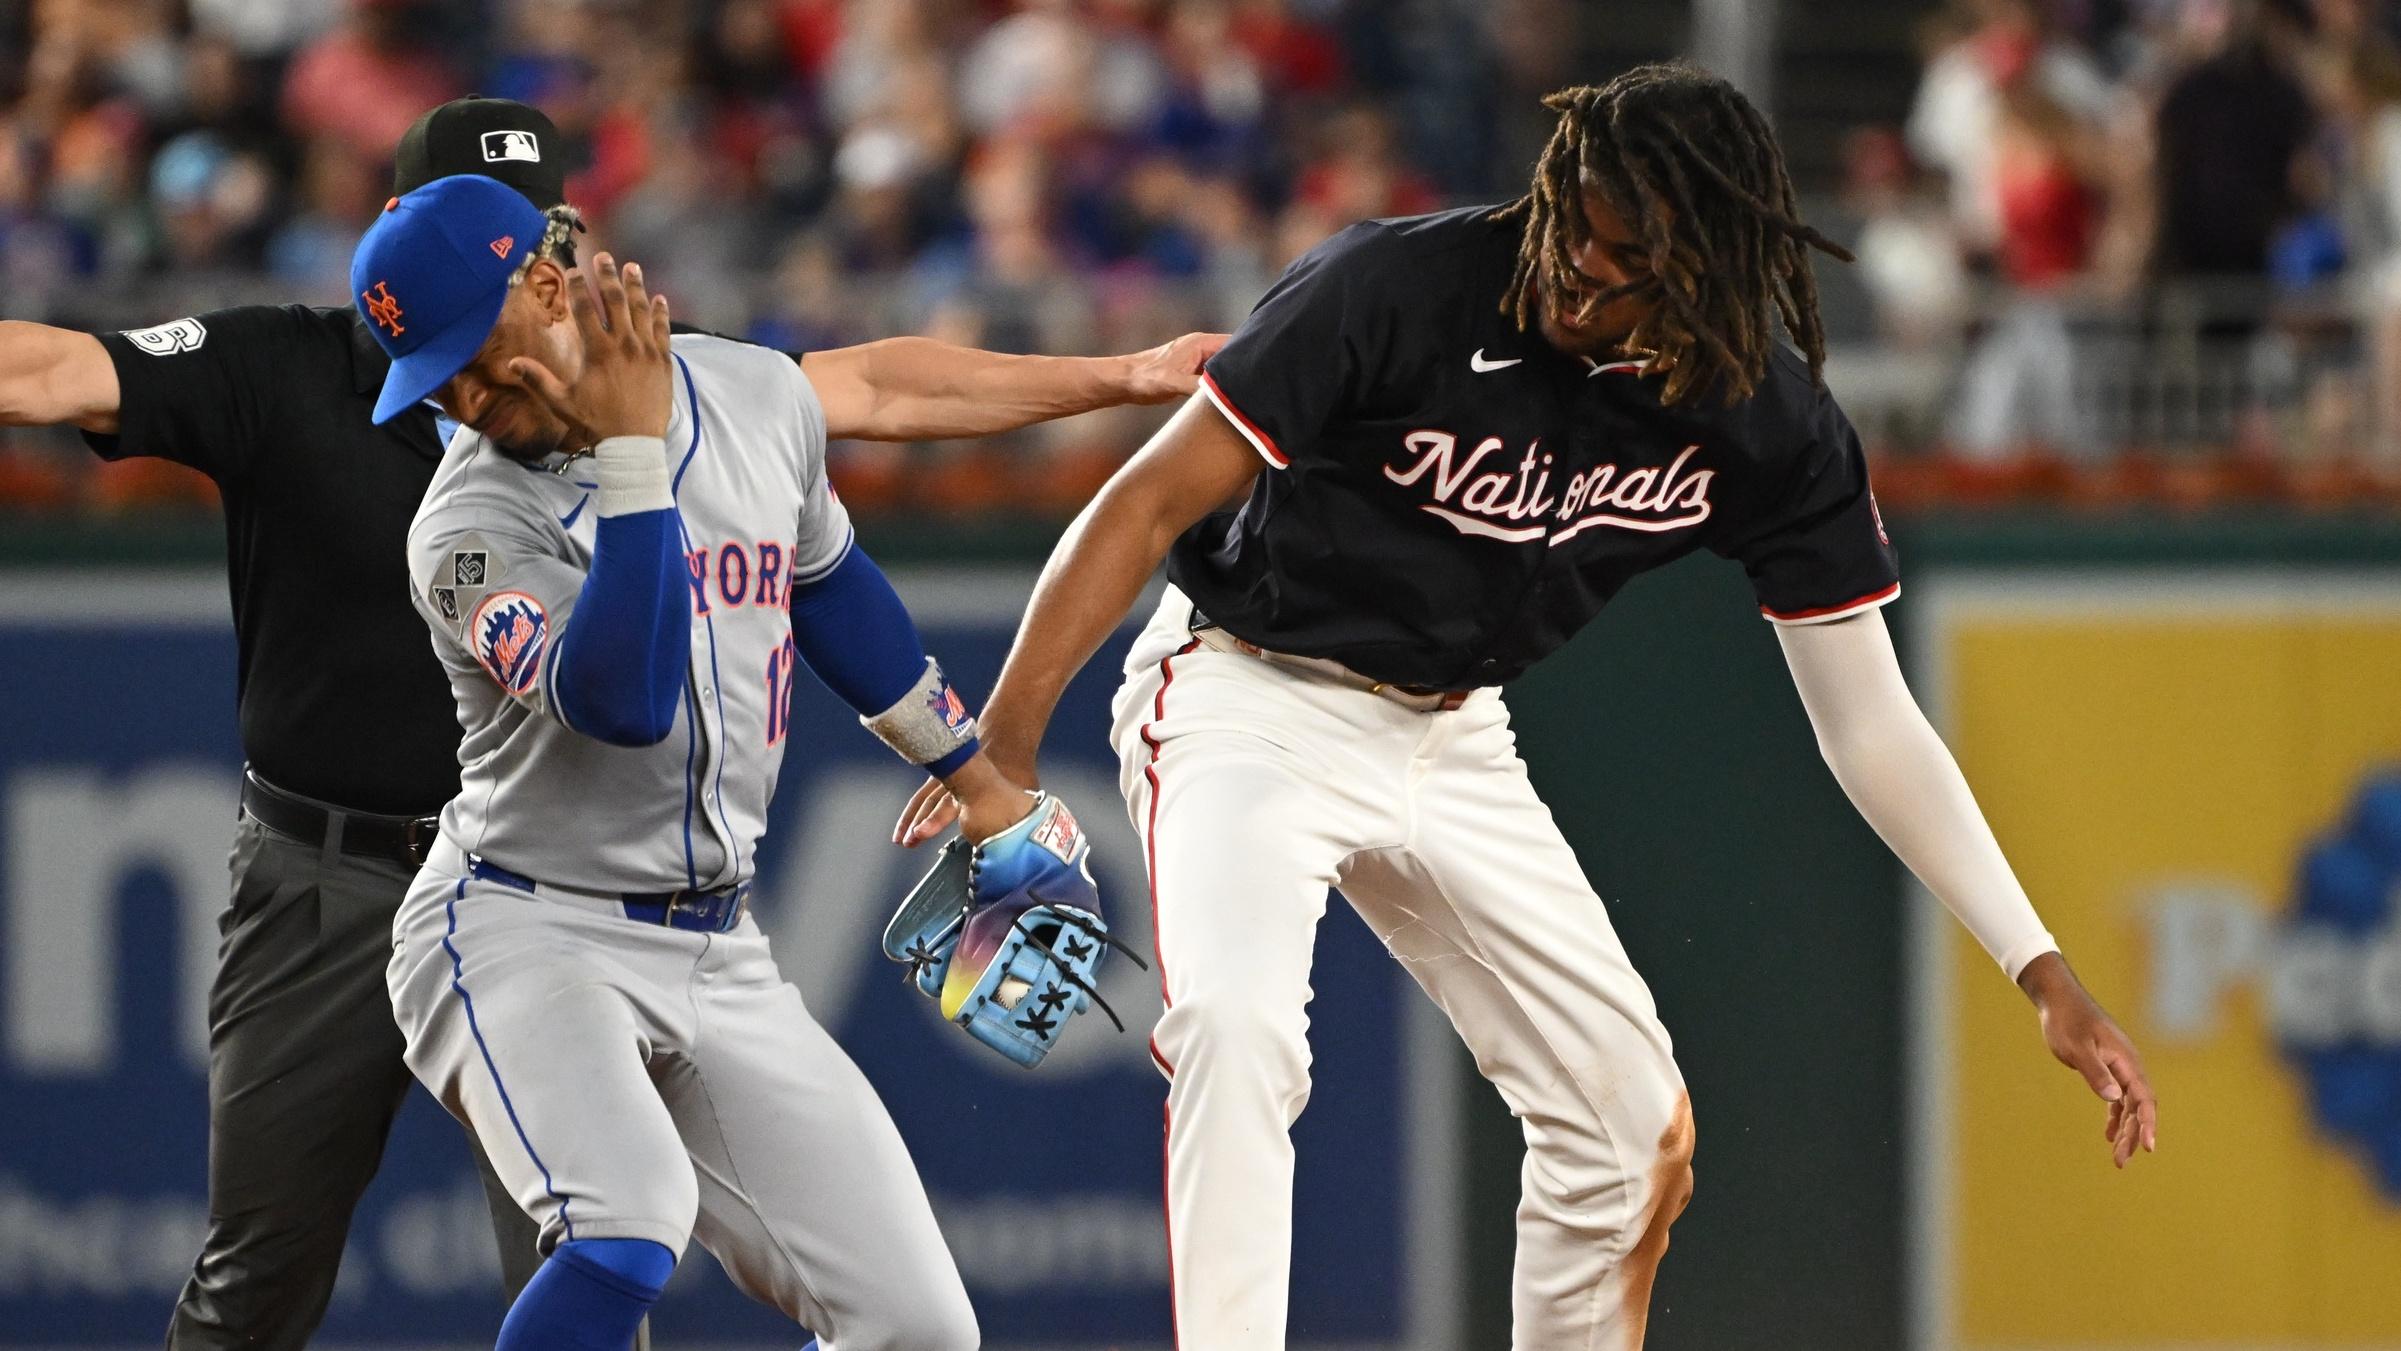 New York Mets shortstop Francisco Lindor (12) reacts after colliding with Washington Nationals center fielder James Wood (50) at second base during the seventh inning at Nationals Park.